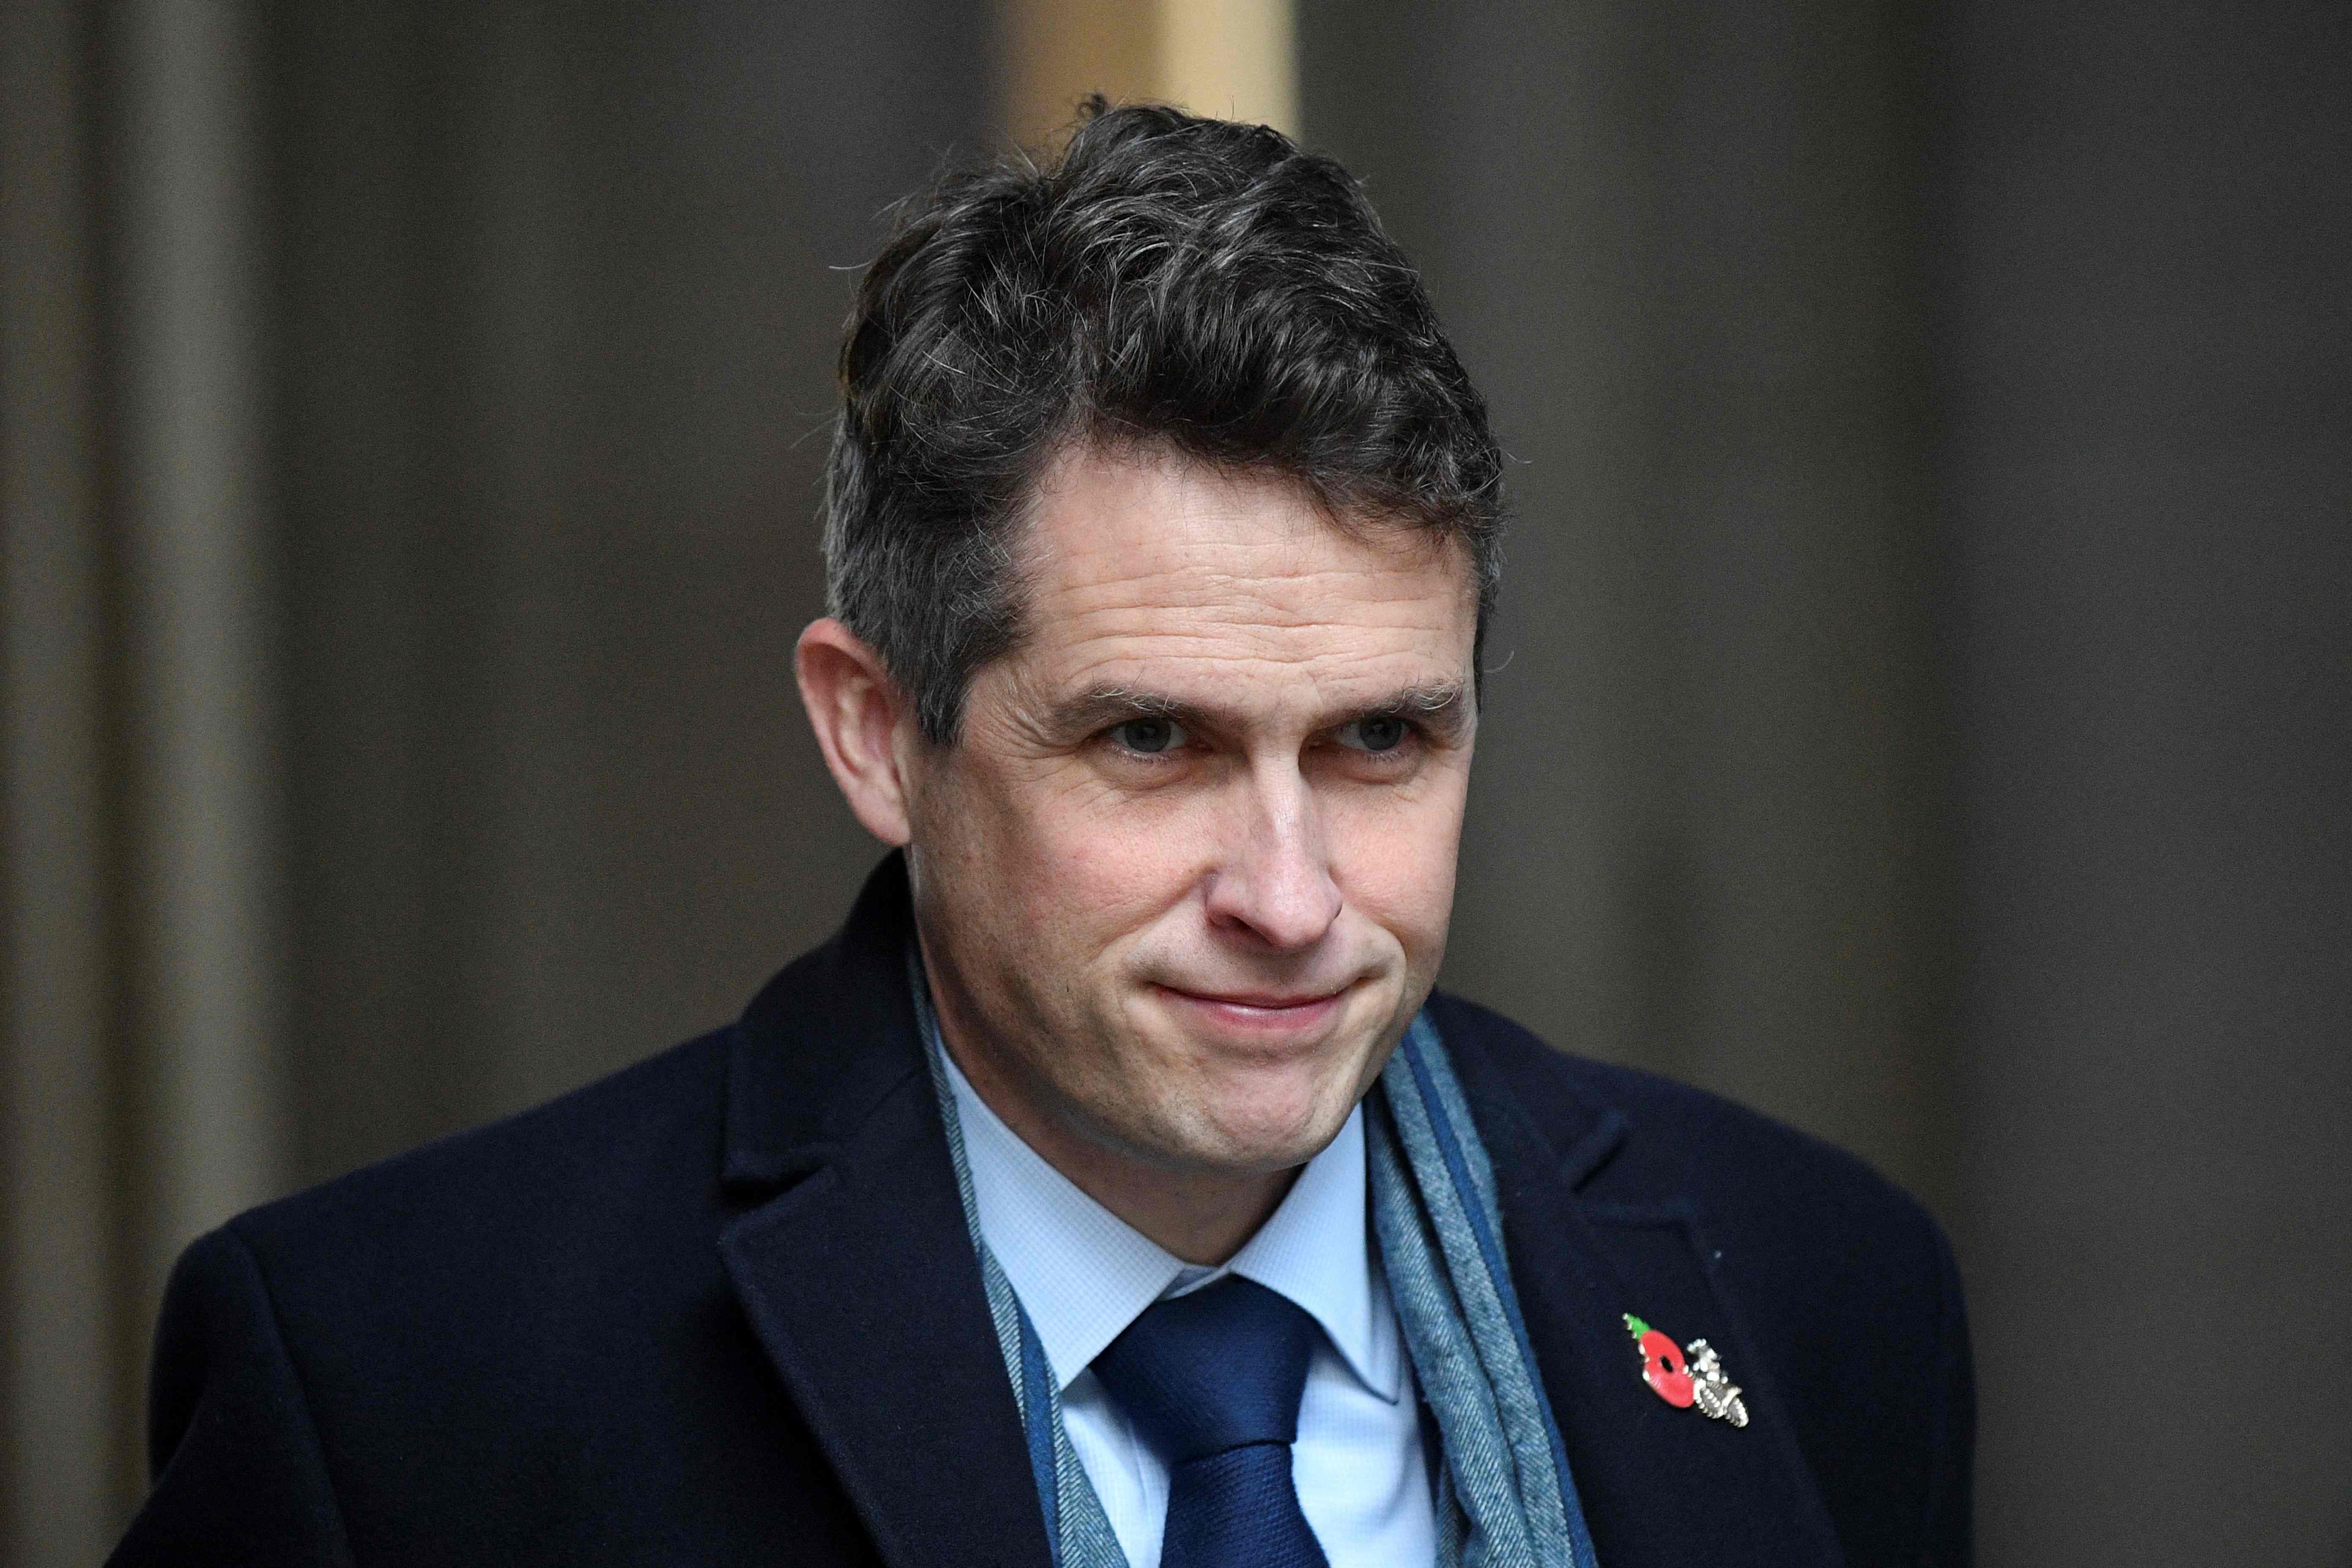 Gavin Williamson going to the back benches doesn’t fill the fiscal black hole, or deal with the small boats crisis